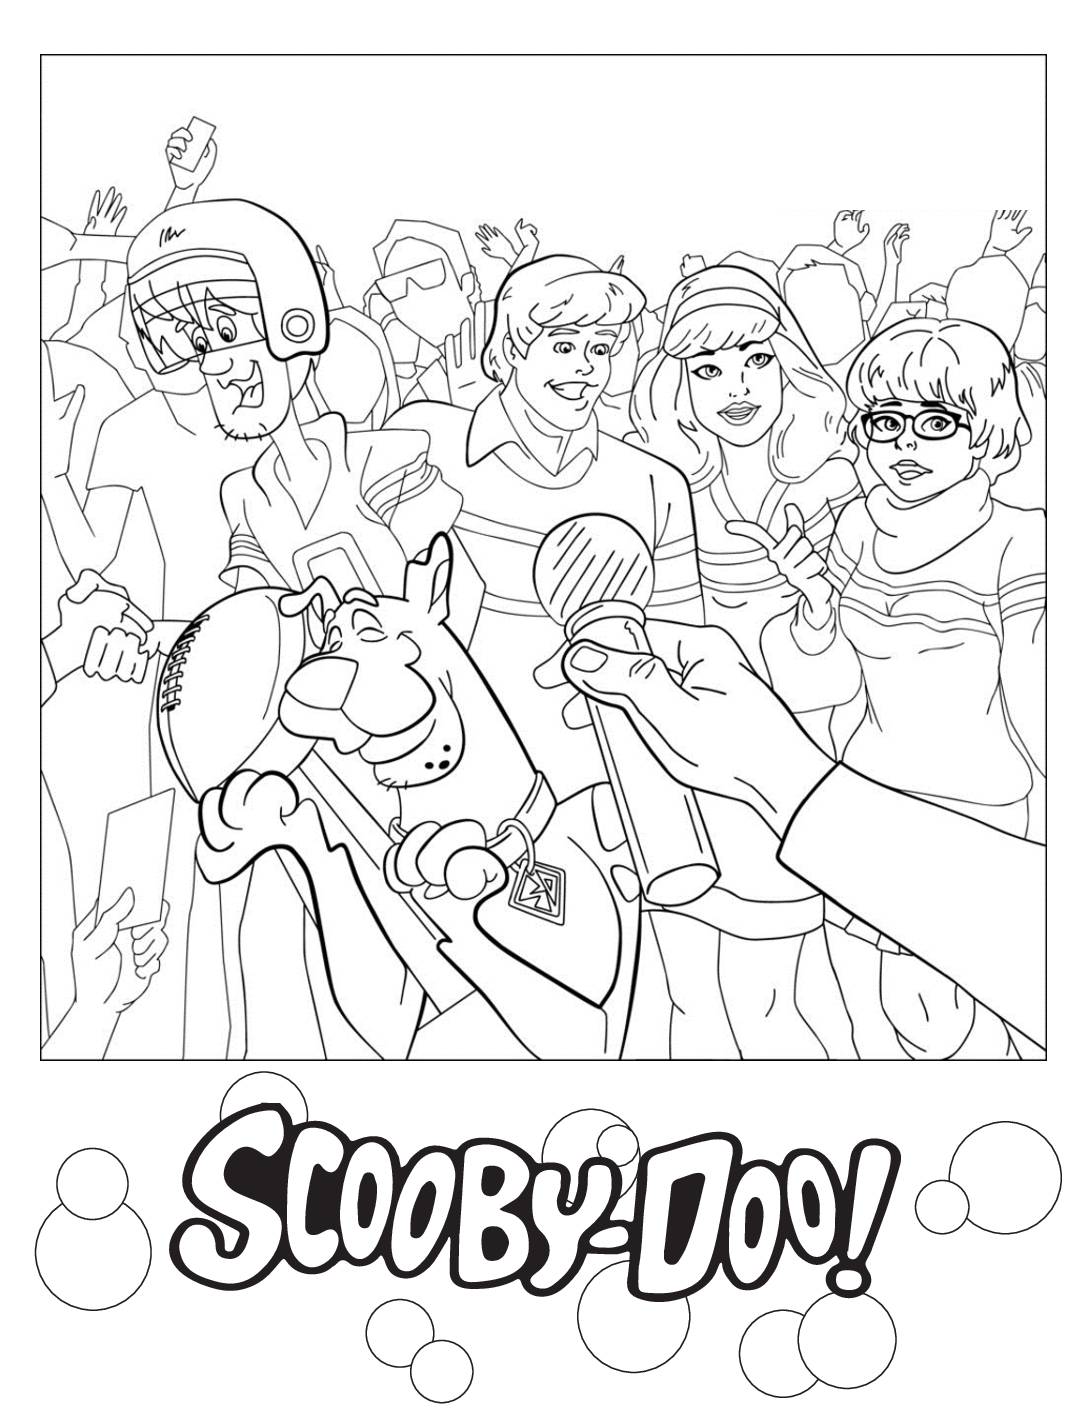 Coloring Page 3 Scooby Doo Coloring Pages